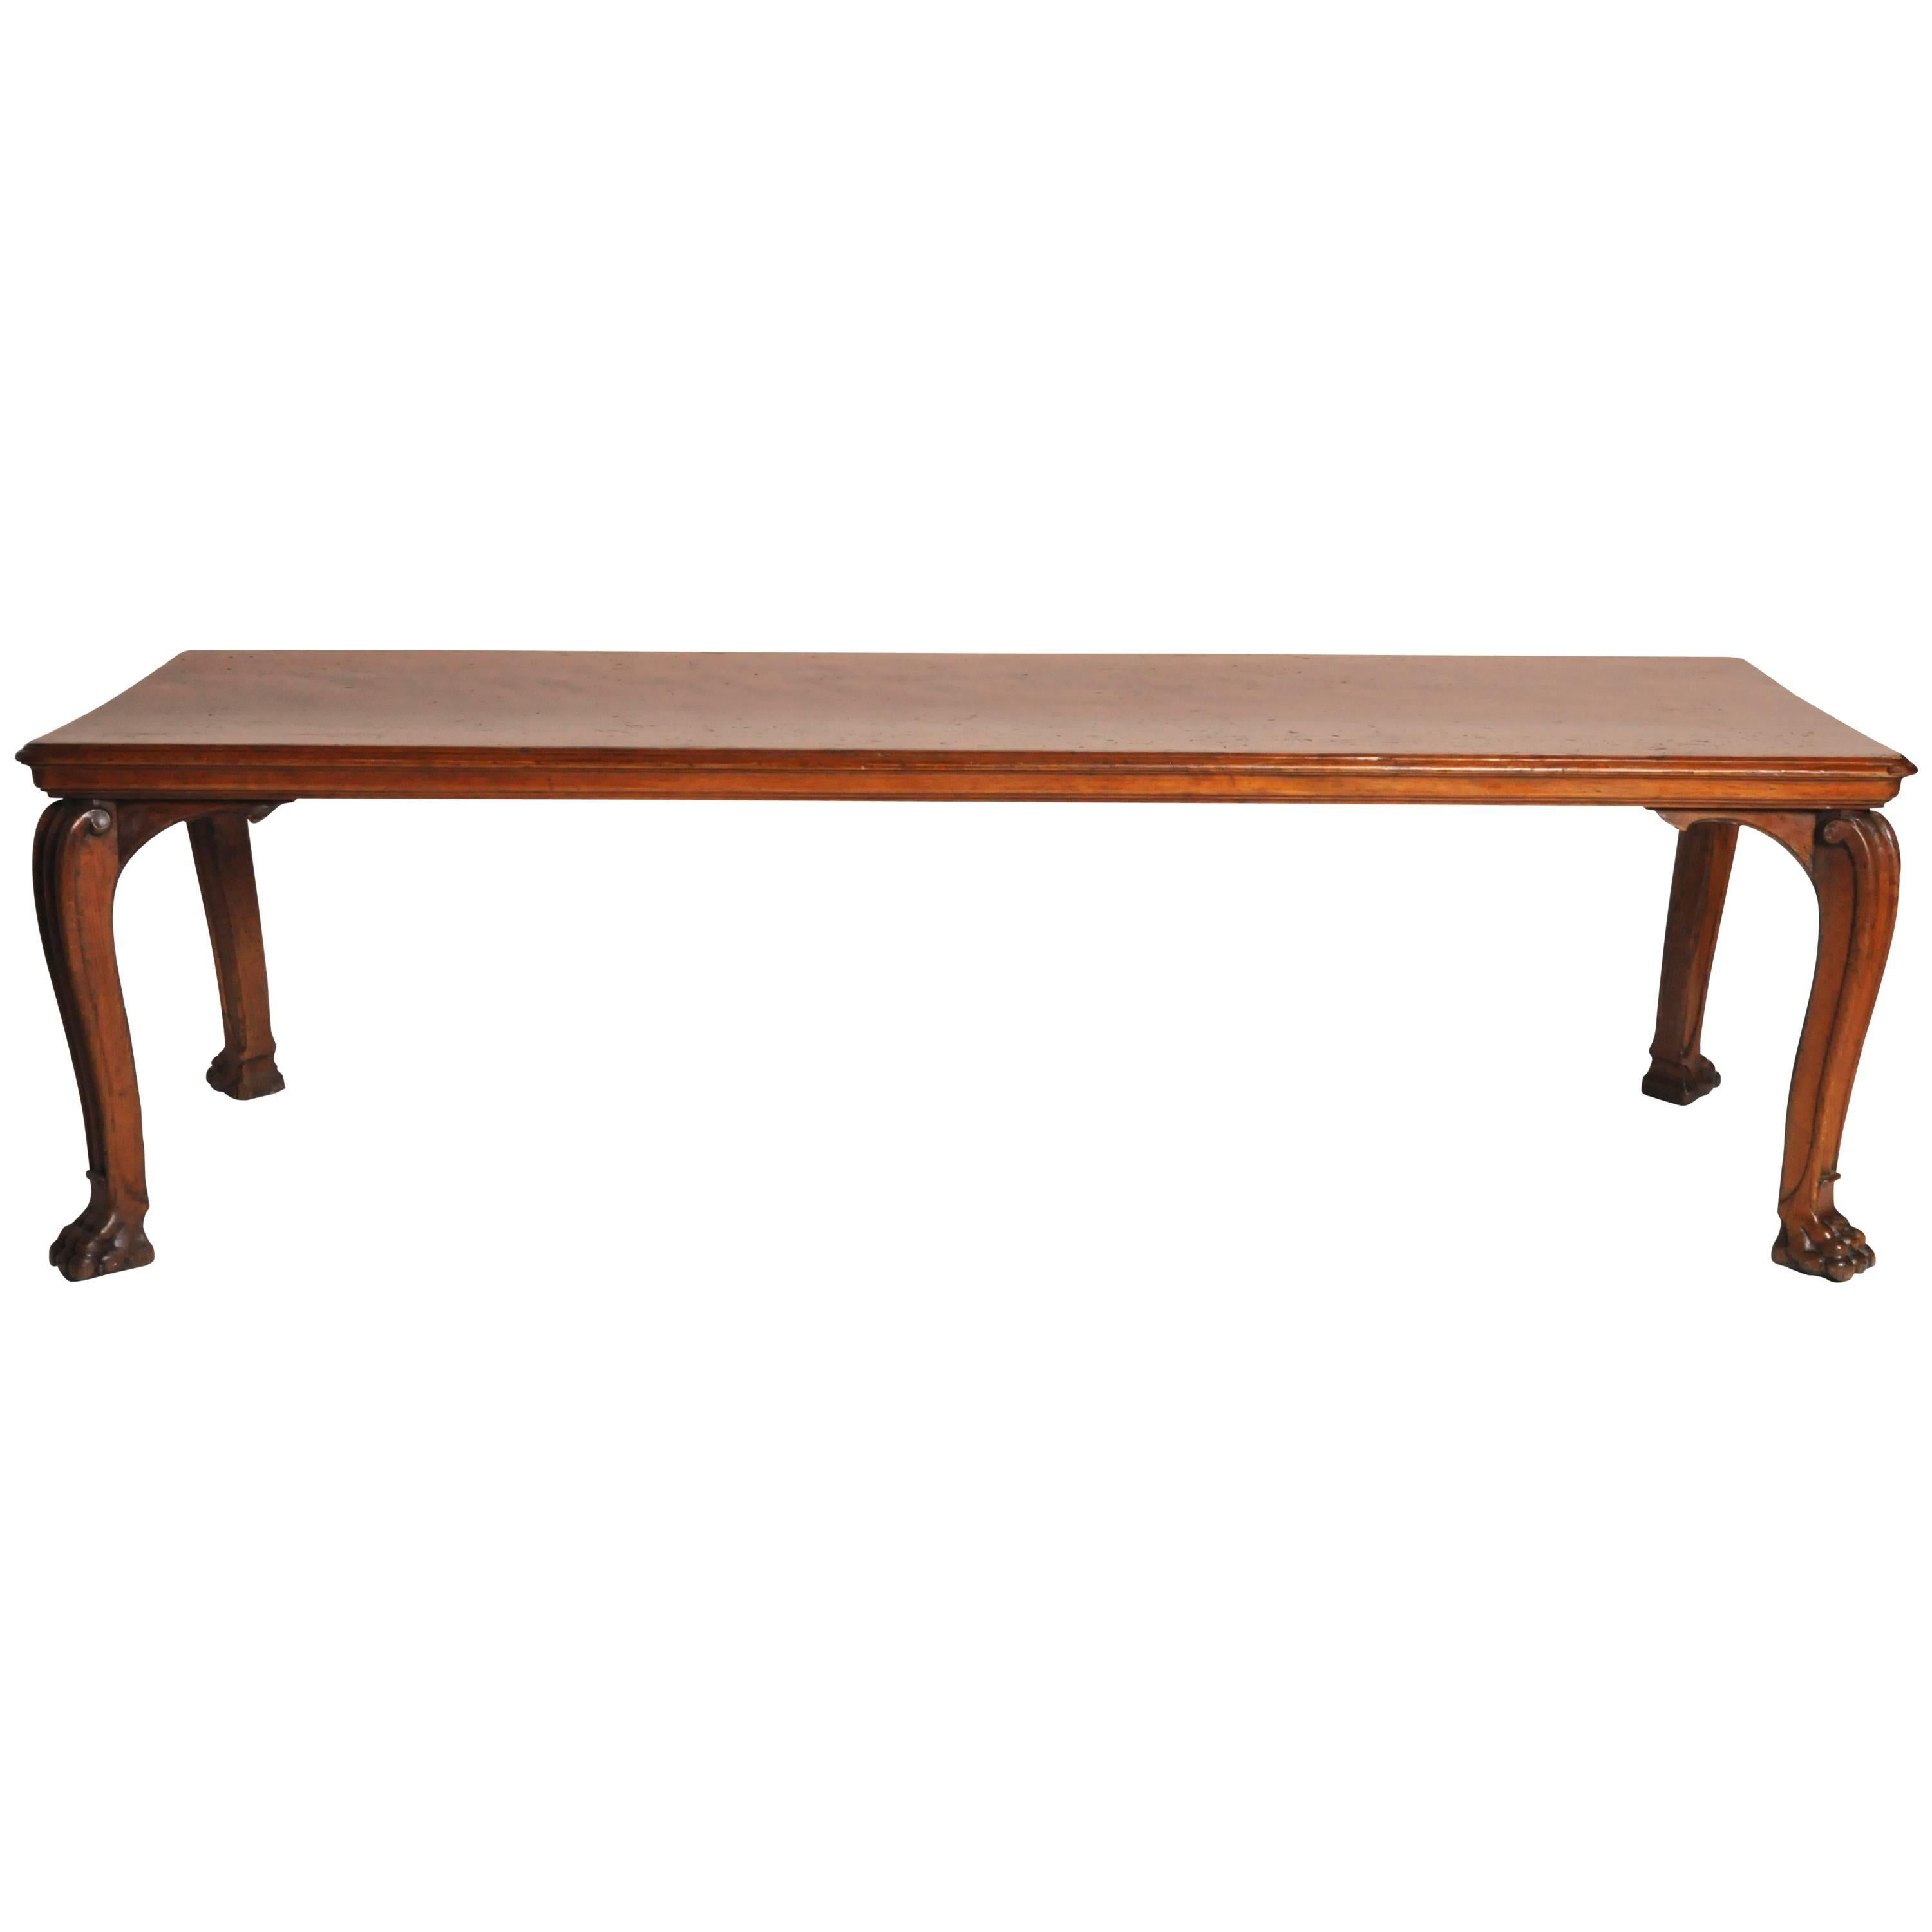 Solid Walnut Top Dinning Table